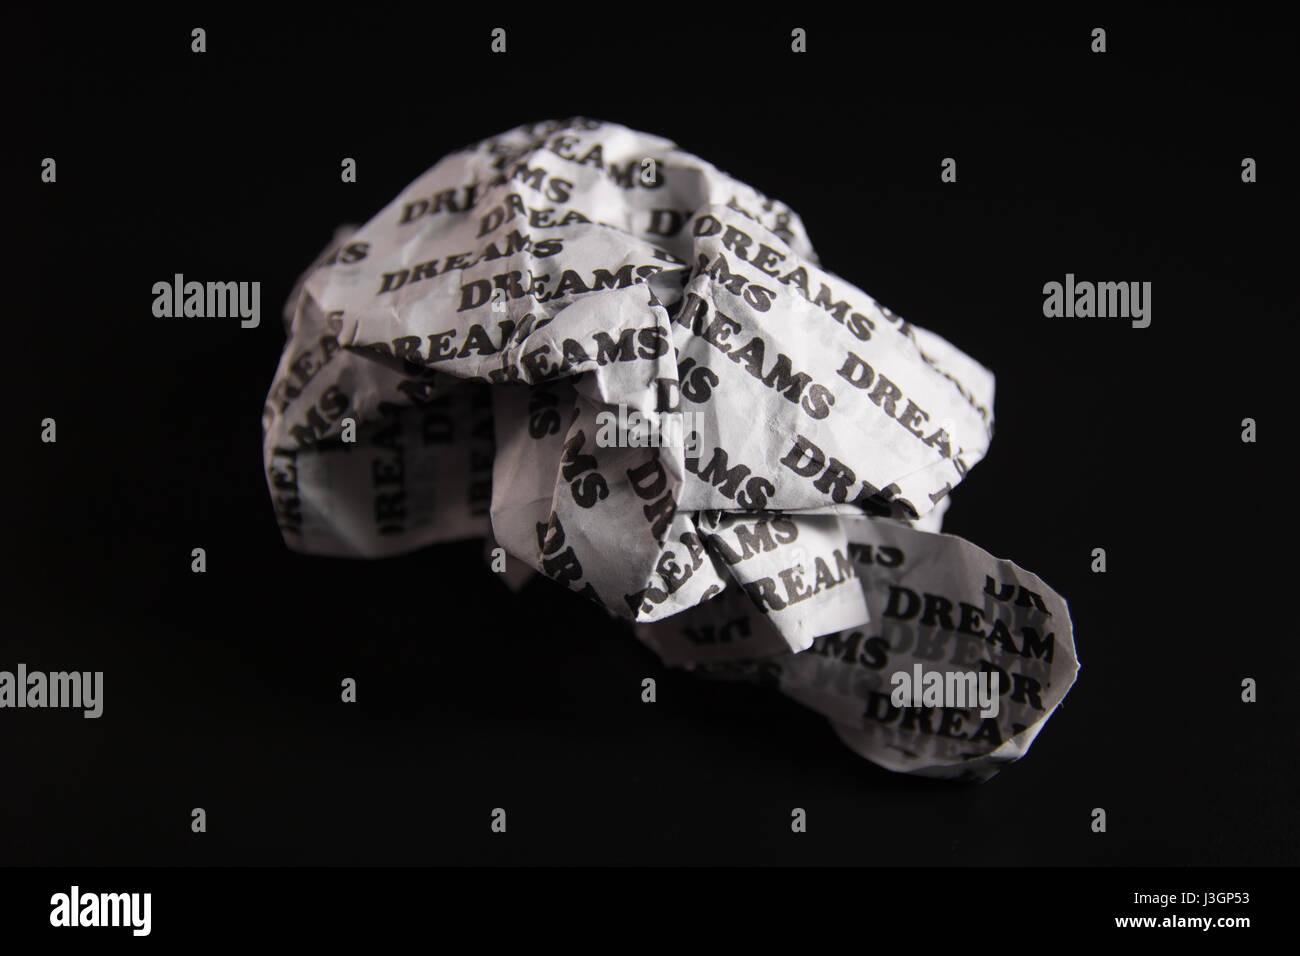 A crumpled paper with the words 'dreams' written all over it on a black background. Stock Photo